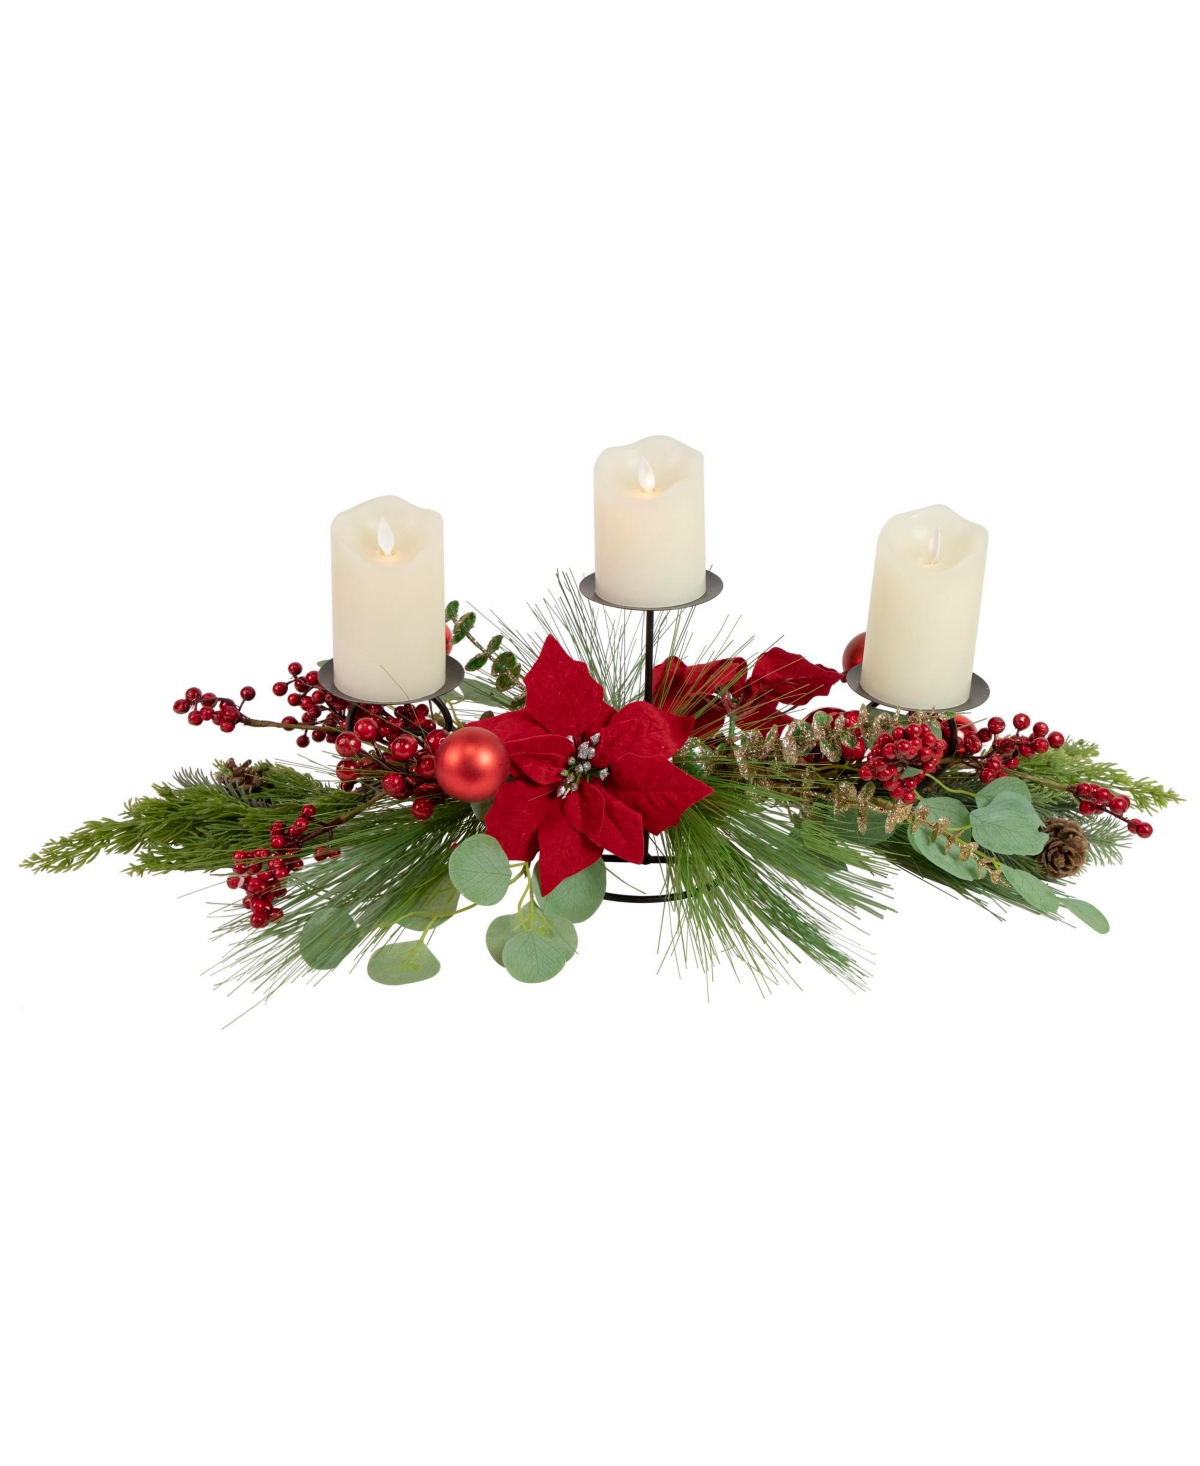 Triple Candle Holder With Berry and Poinsettia Christmas Decor, 32" - Black